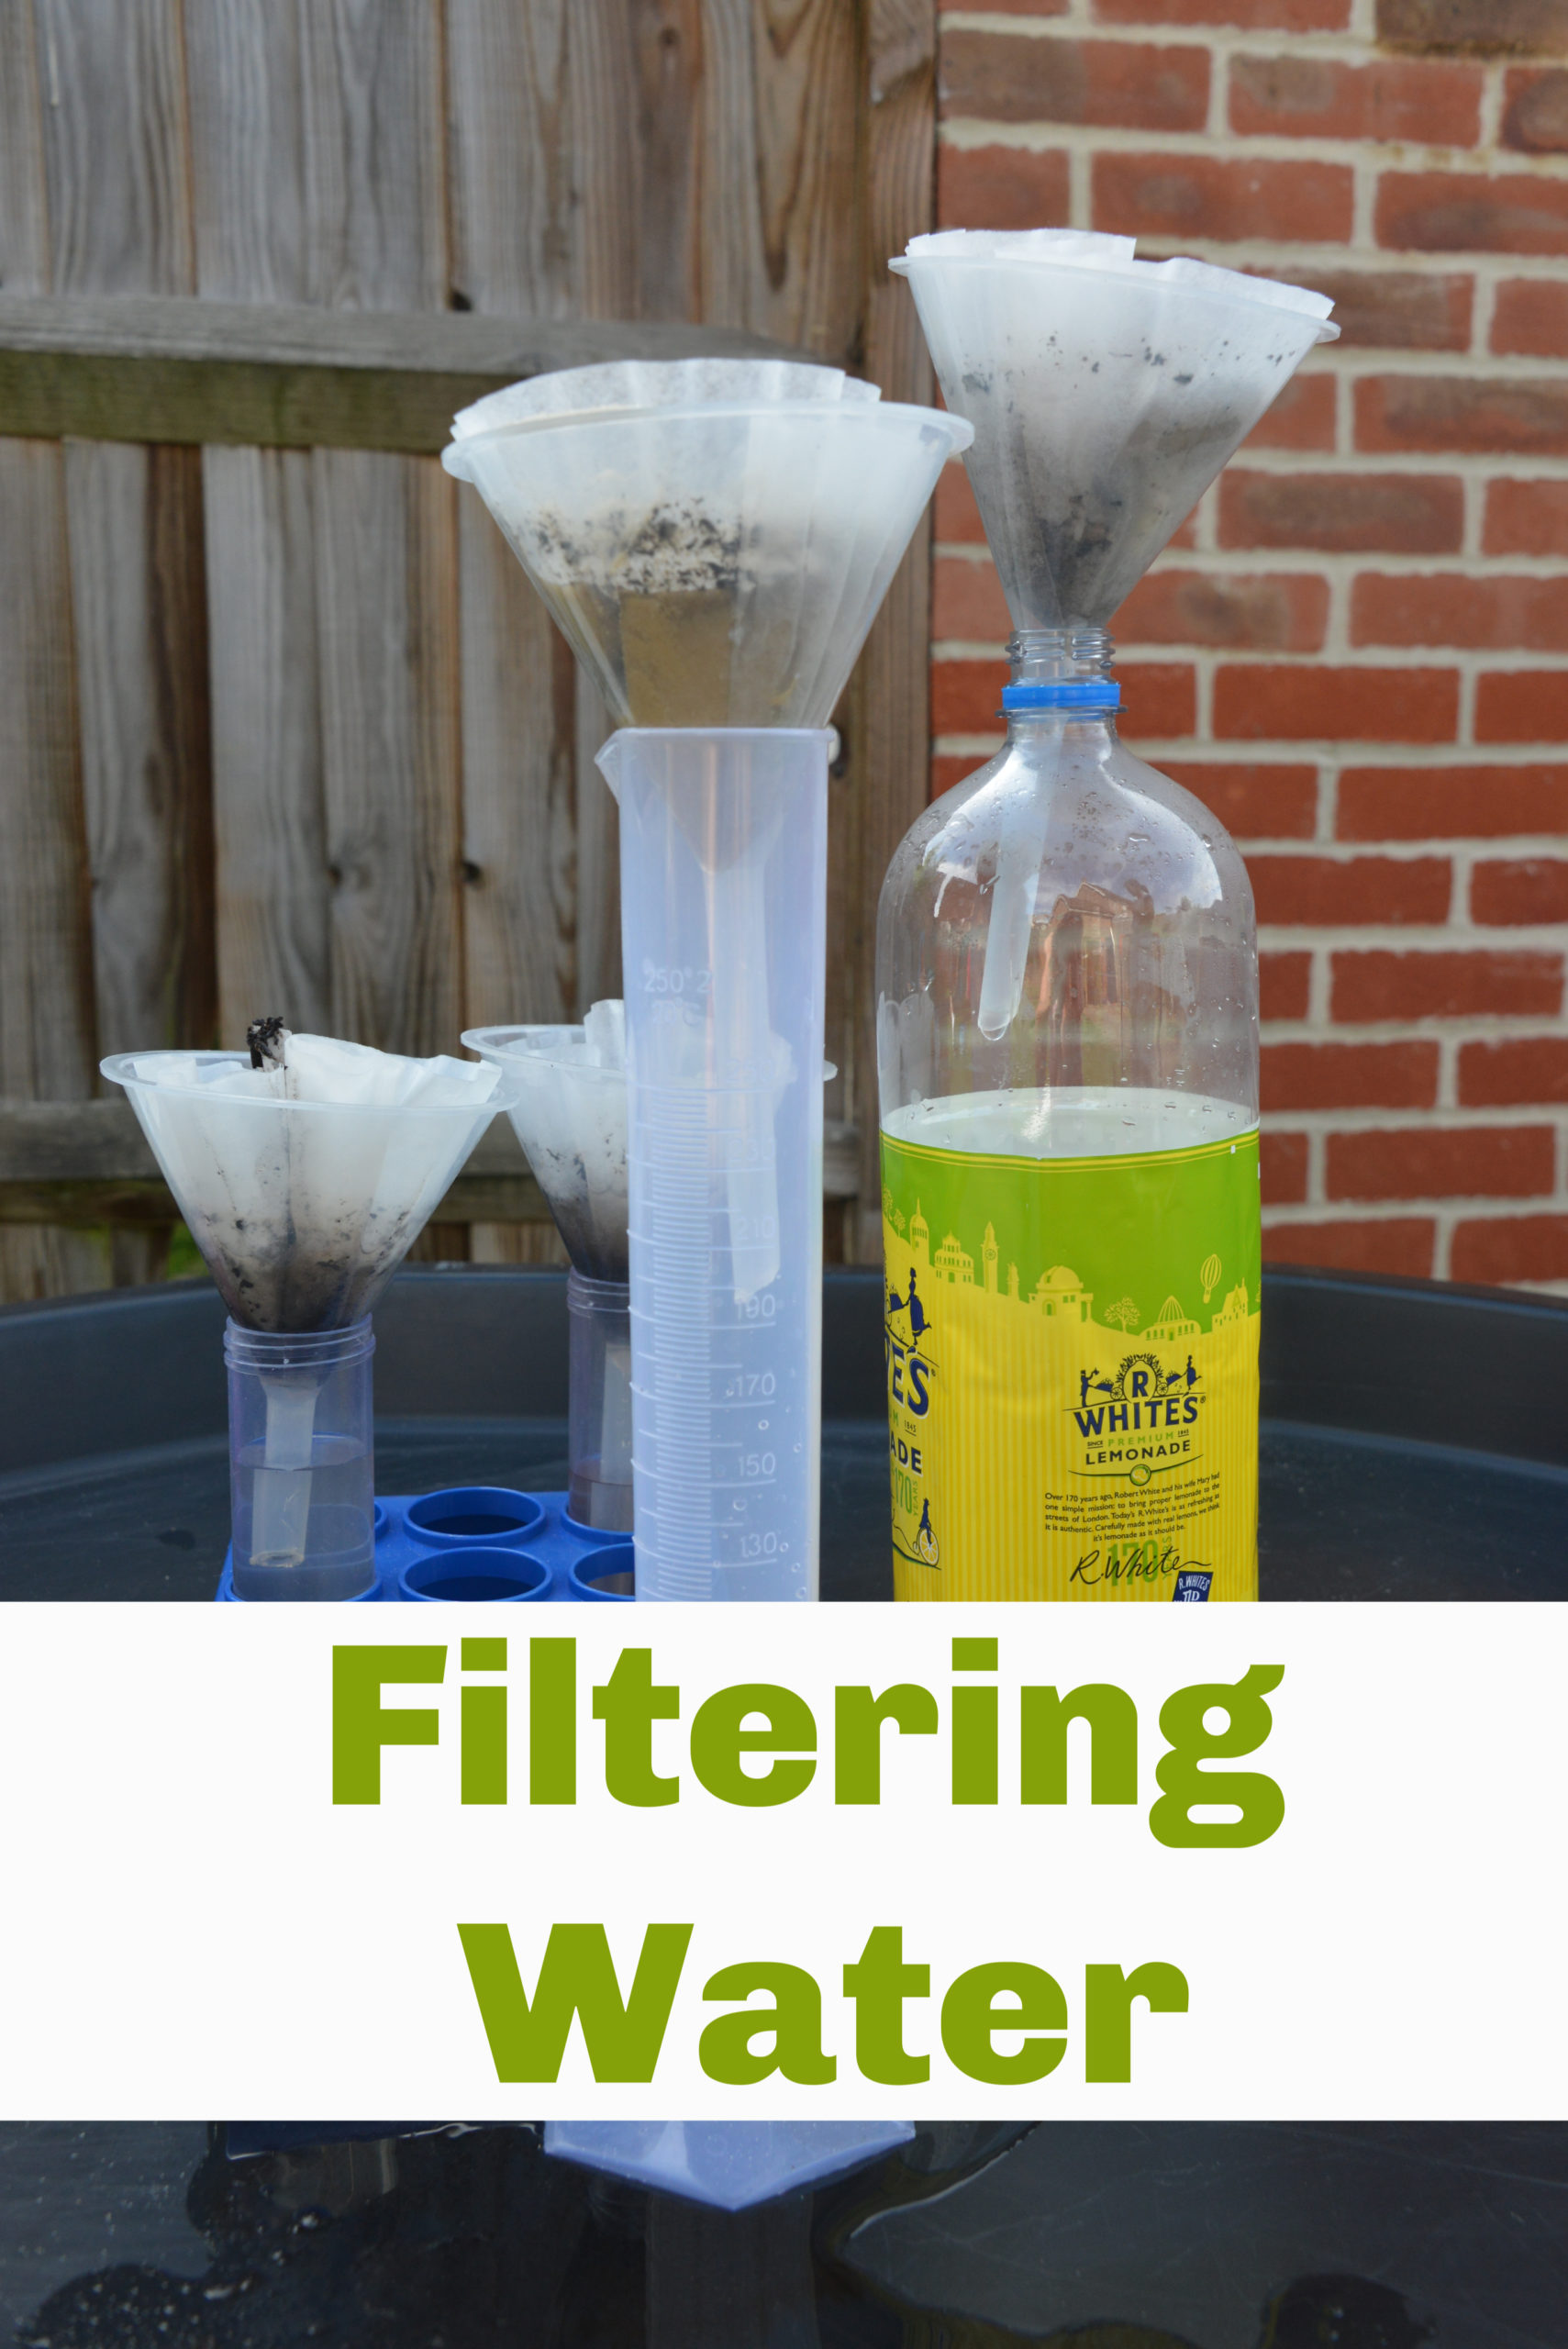 hypothesis water filter experiment